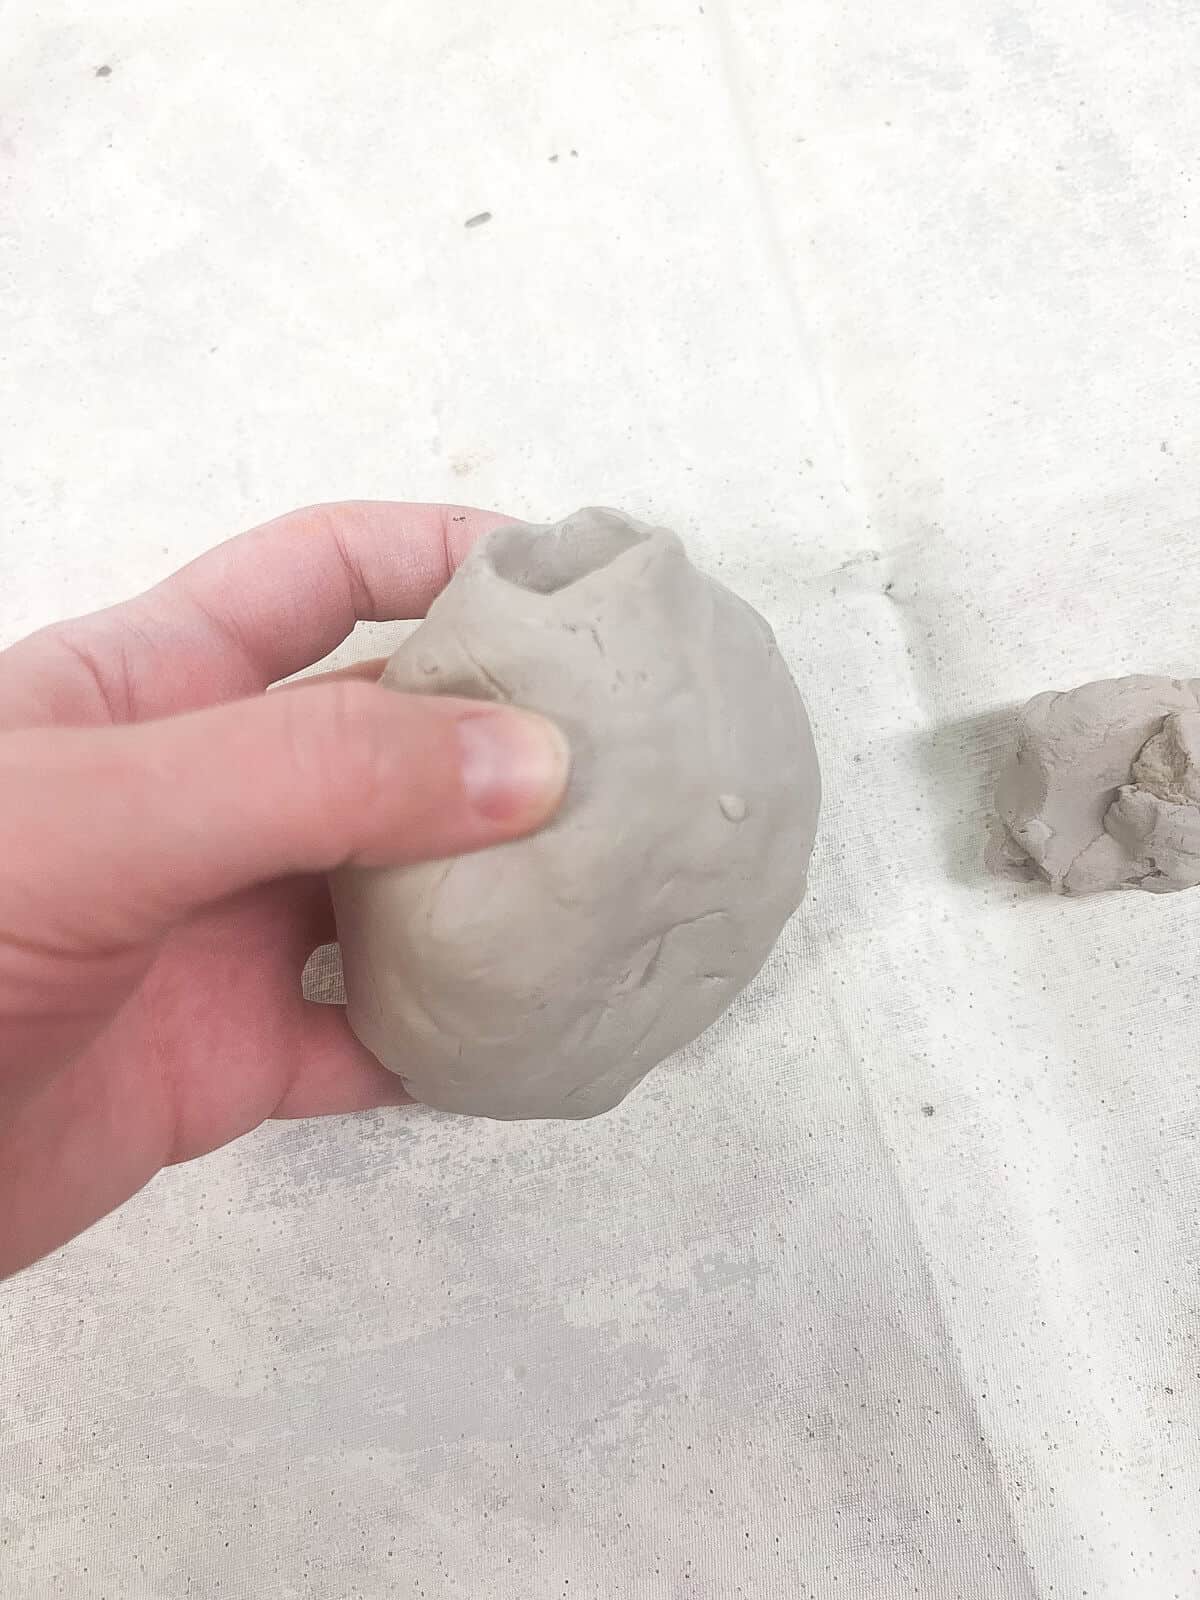 hollow clay form that will be used to create a clay fish art project.